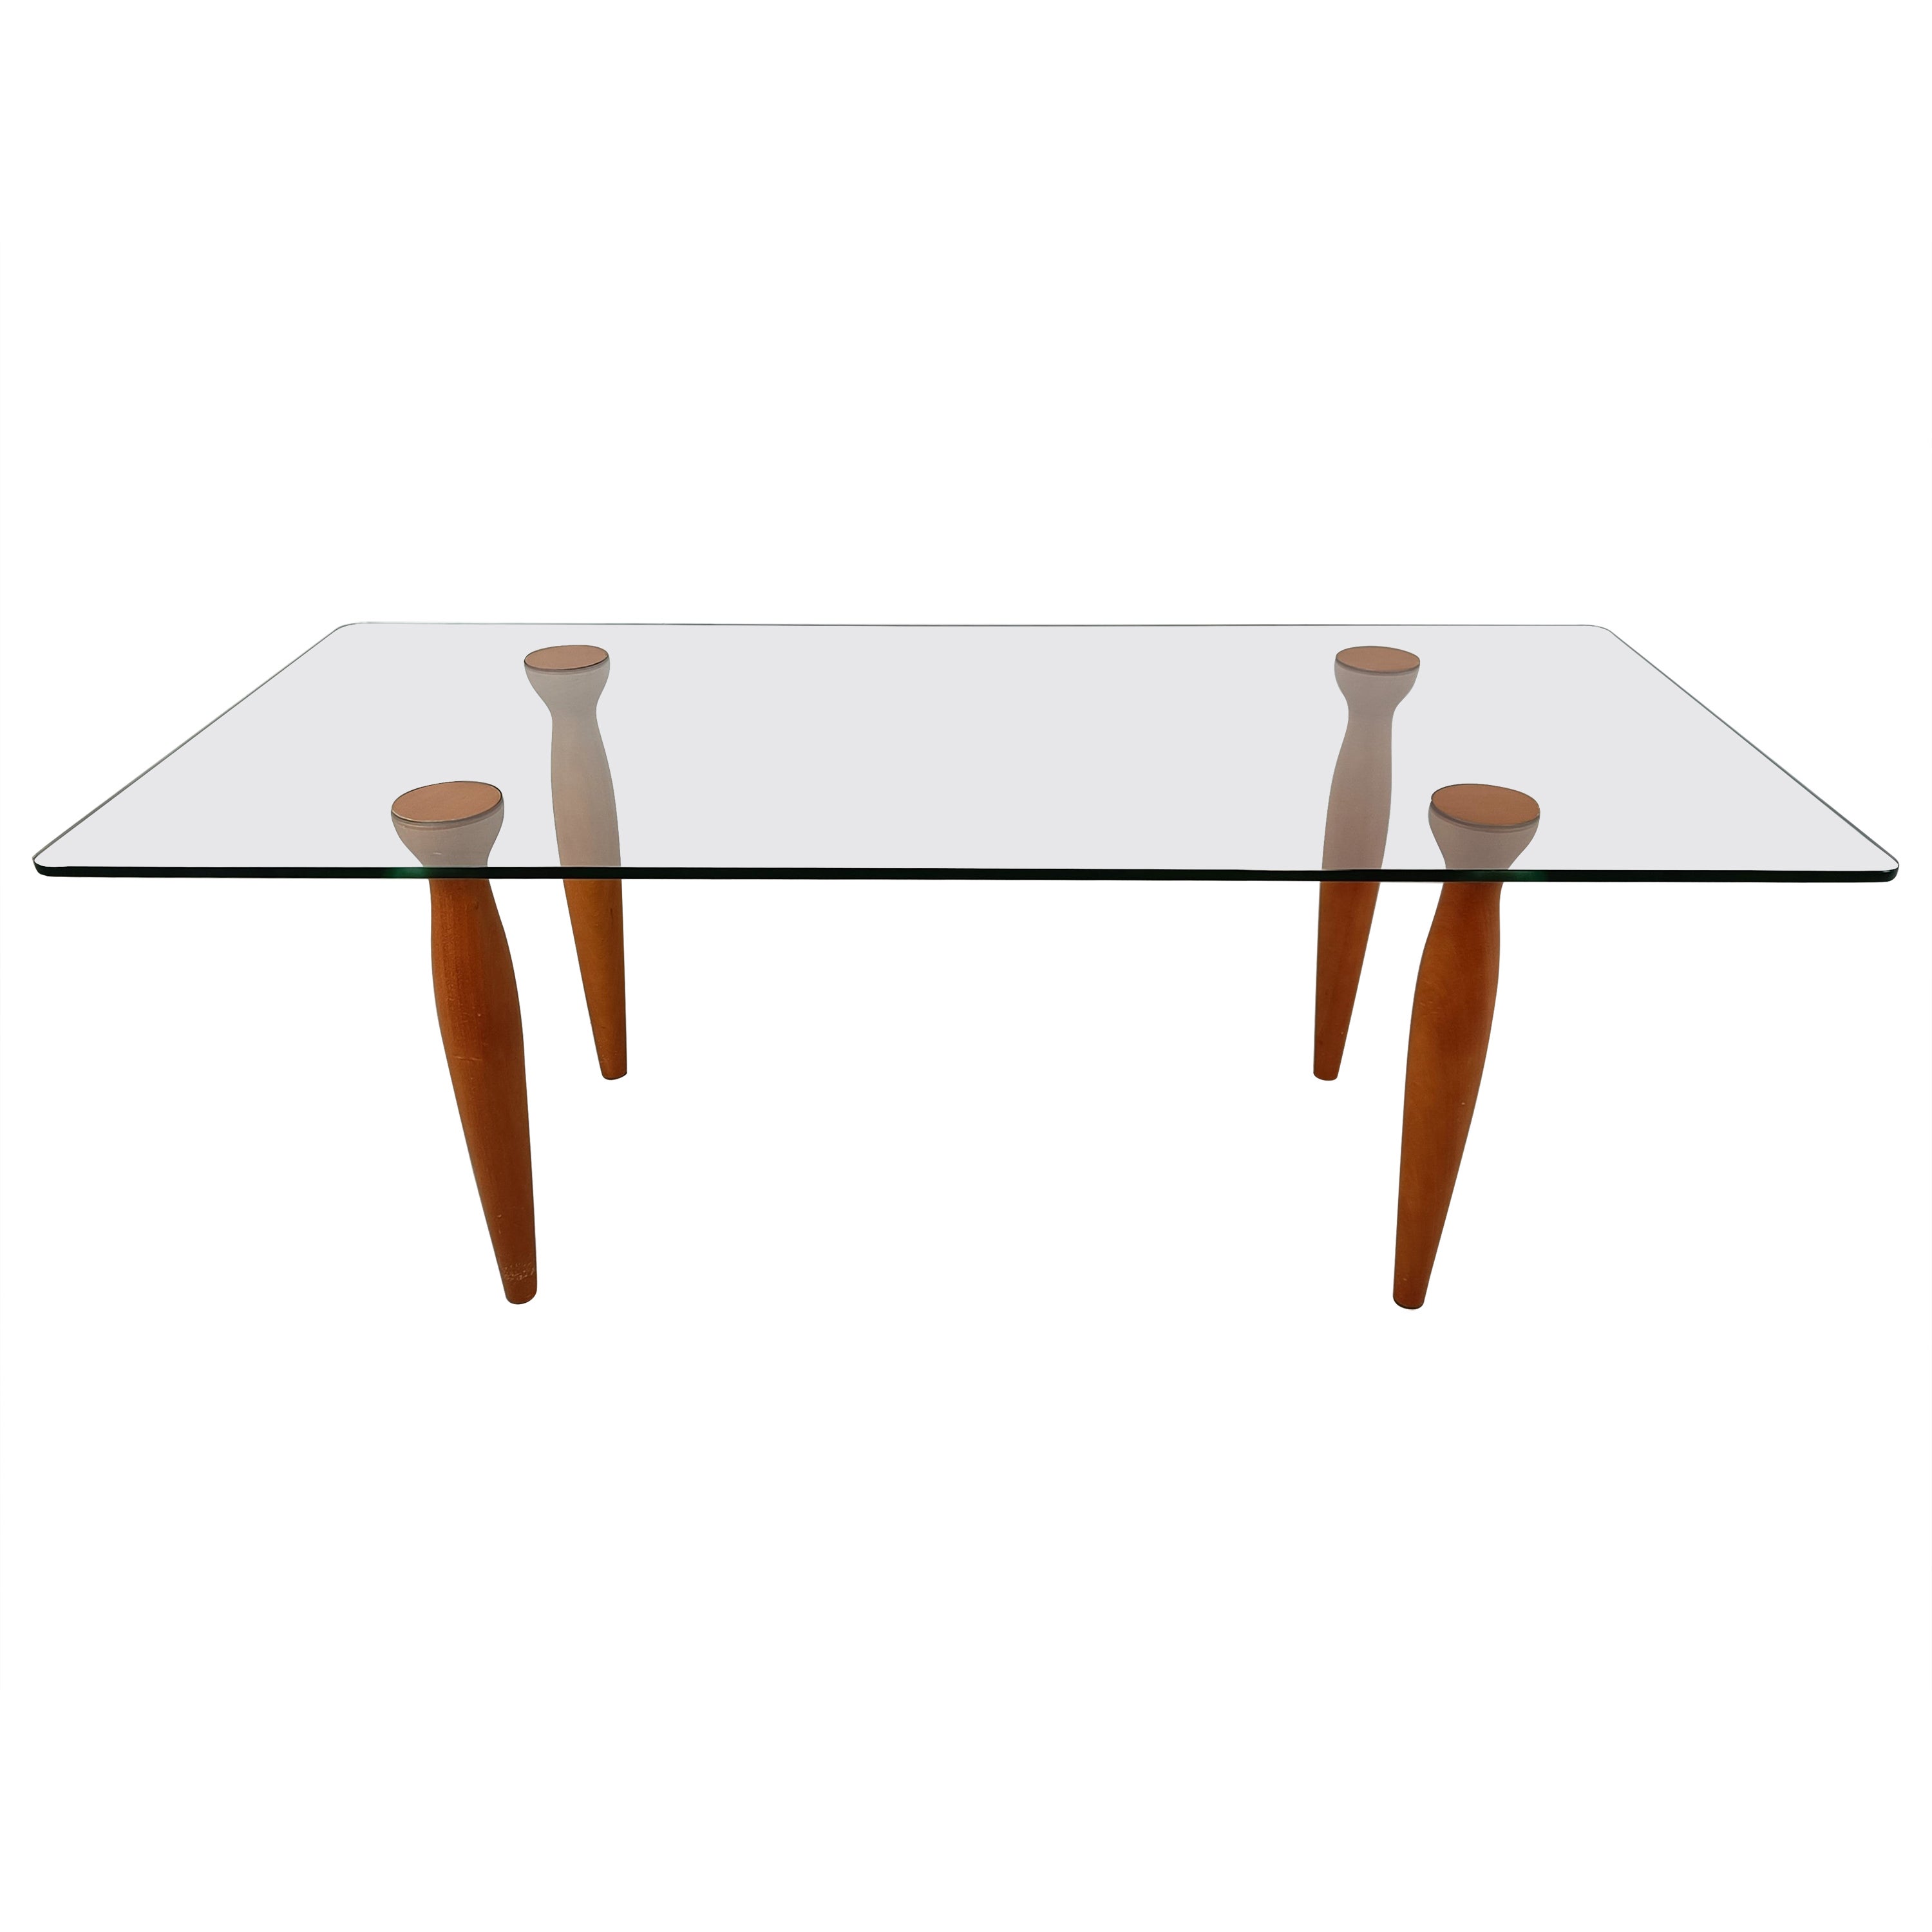 Vintage italian glass and wooden dining table, 1990s For Sale